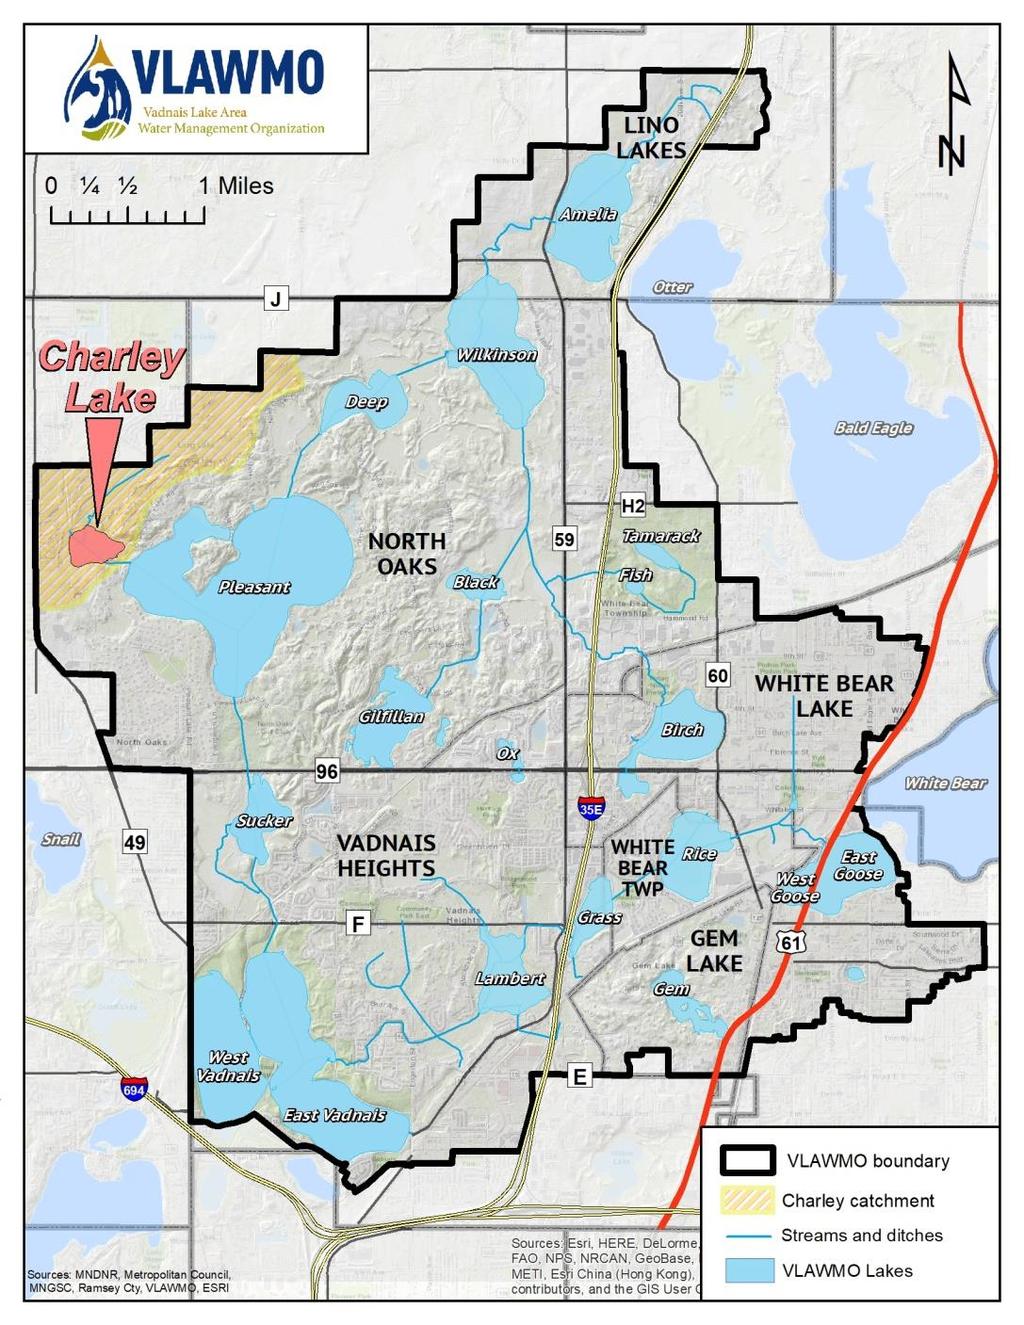 1 INTRODUCTION 1. INTRODUCTION Charley Lake is located in the City of North Oaks, Ramsey County, and within the Vadnais Lake Area Water Management Organization (VLAWMO) watershed area.